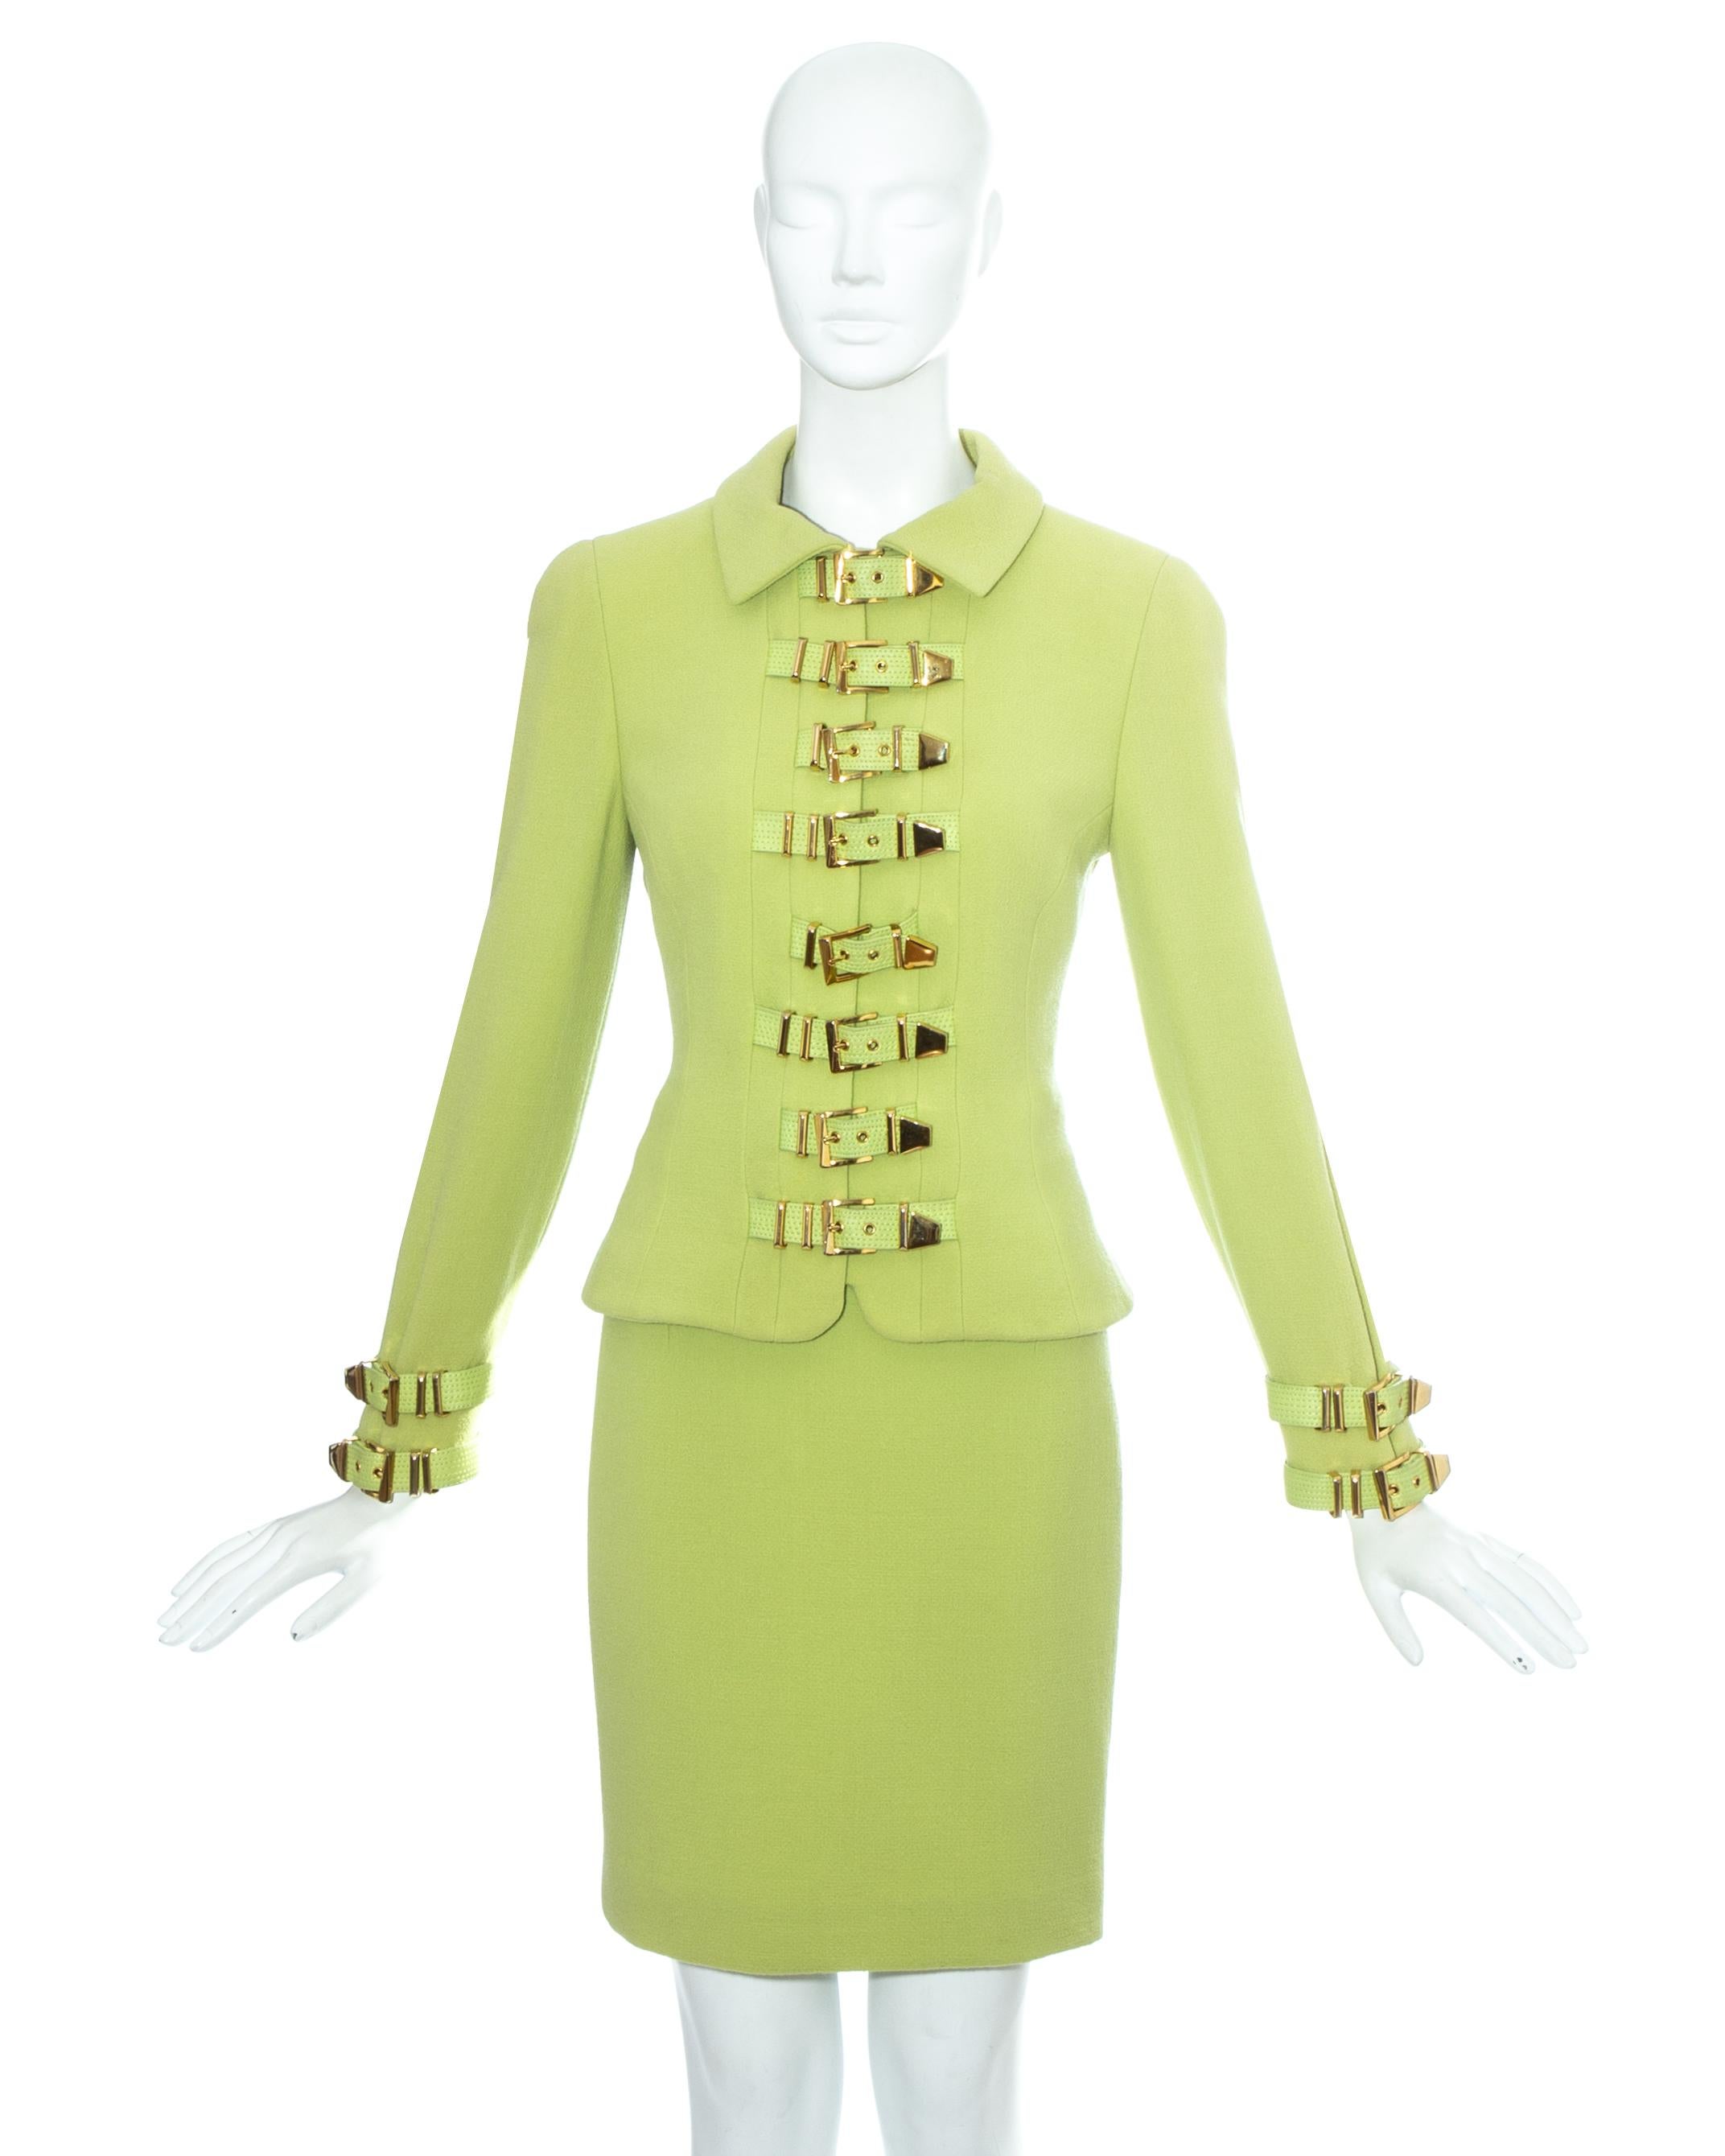 Gianni Versace; lime green wool bondage skirt suit. Structured jacket with 15 leather gold buckle fastenings, hidden zip fastening and silk lining. Sold with matching figure hugging pencil skirt.

Fall-Winter 1992

Image 5 and 6: Gianni Versace